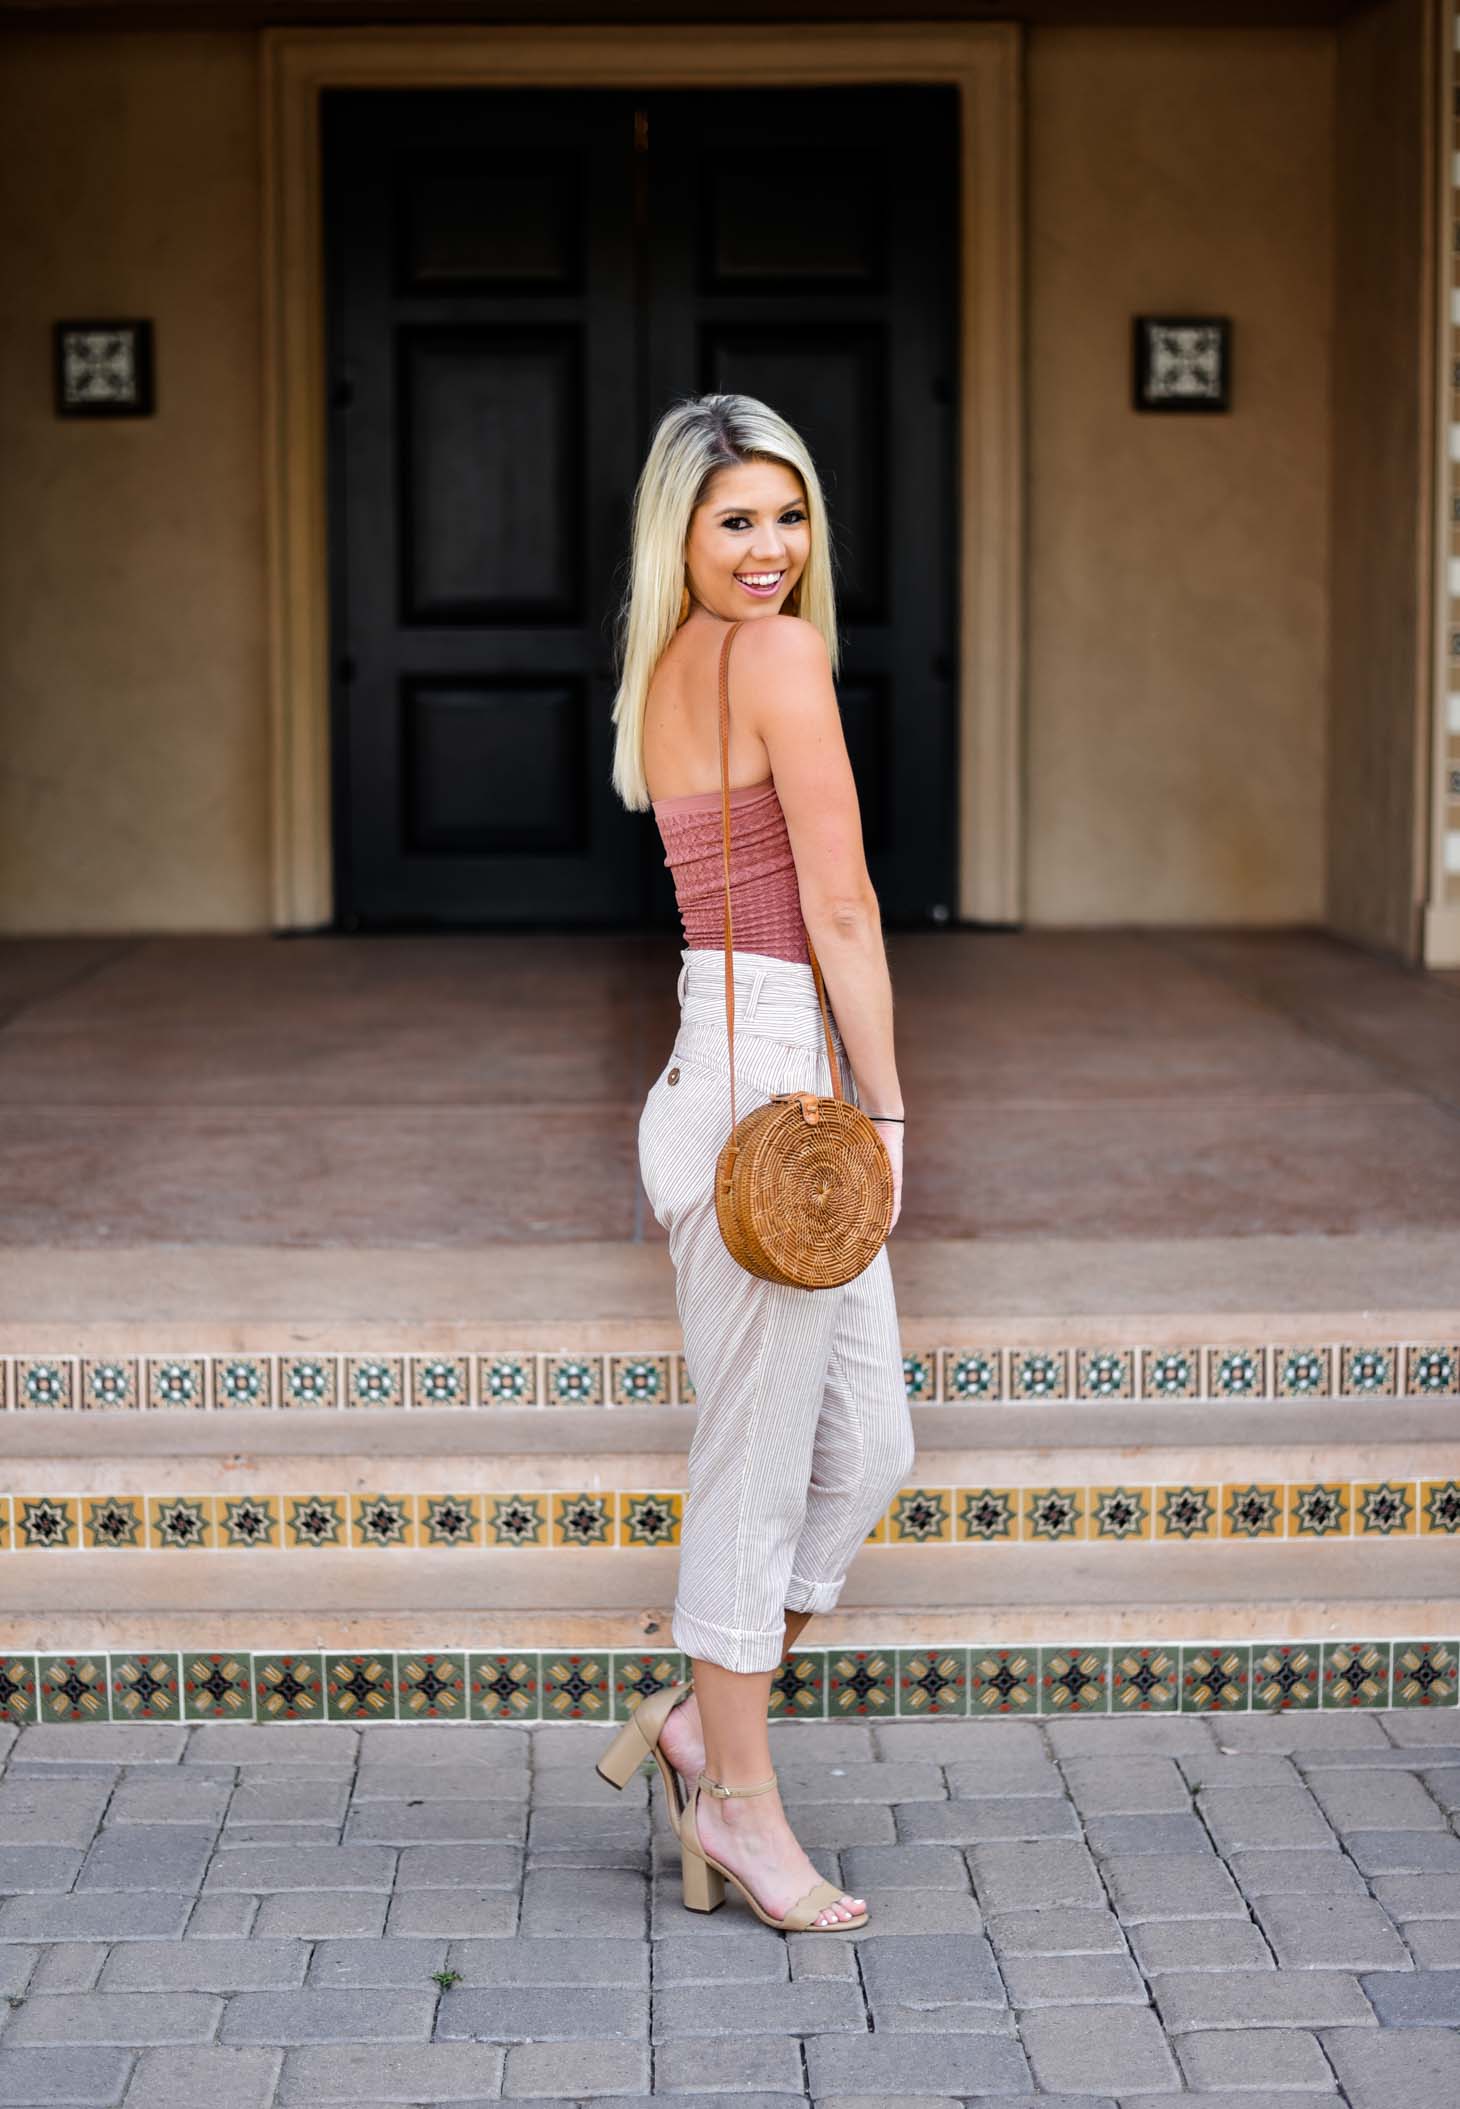 Erin Elizabeth of Wink and a Twirl shares this Free People Style and Outfit Featuring Linen Pants and Top